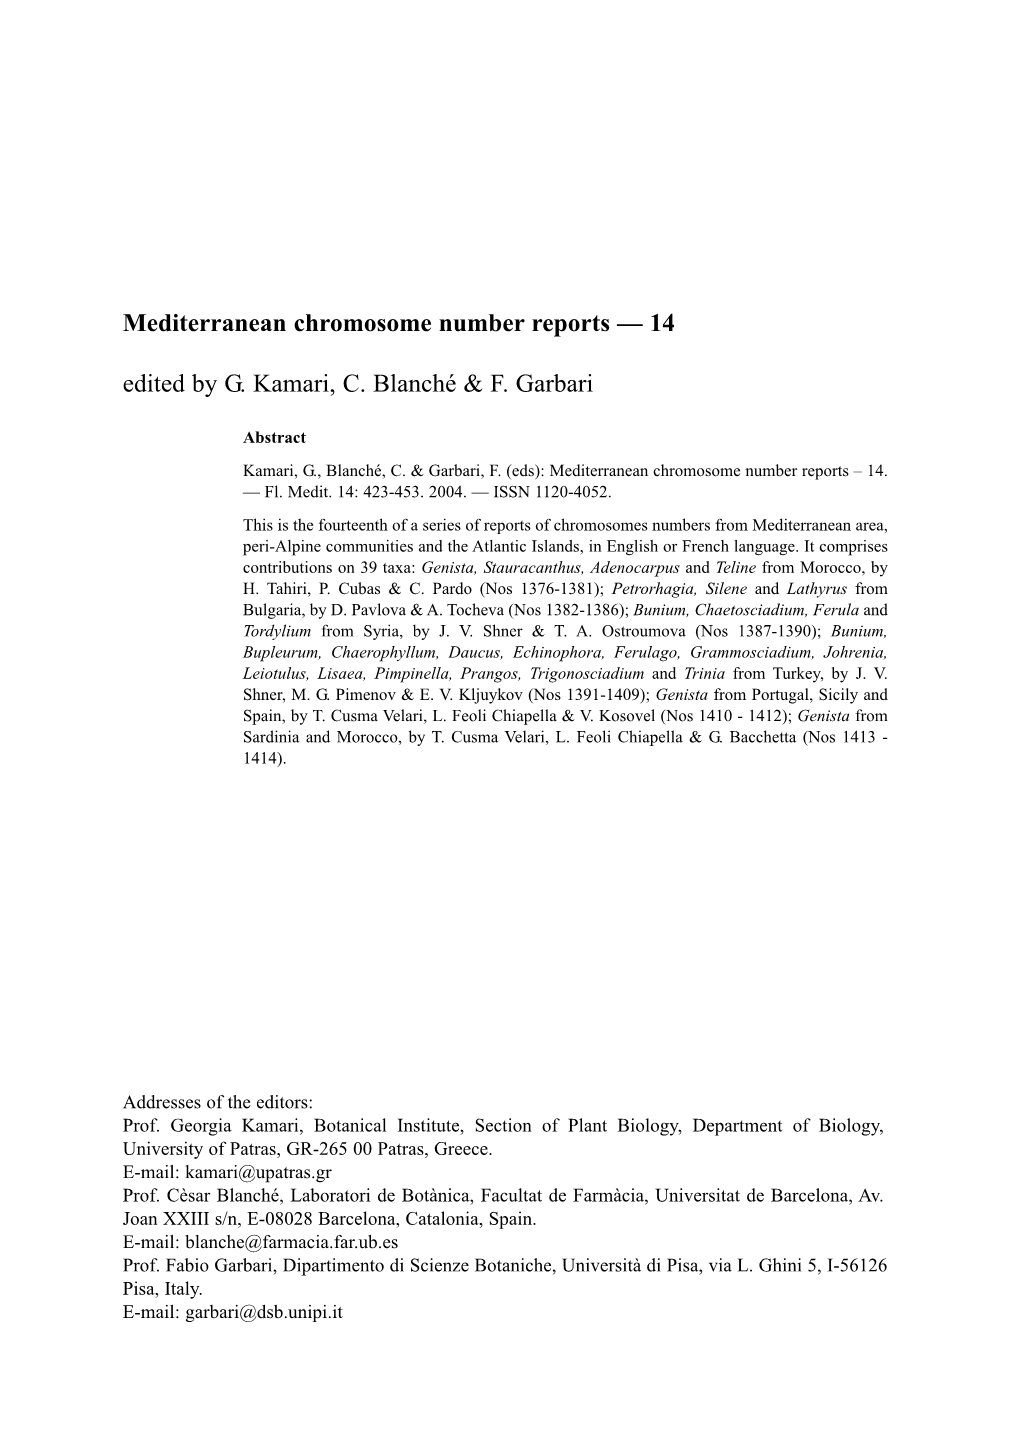 Mediterranean Chromosome Number Reports — 14 Edited by G